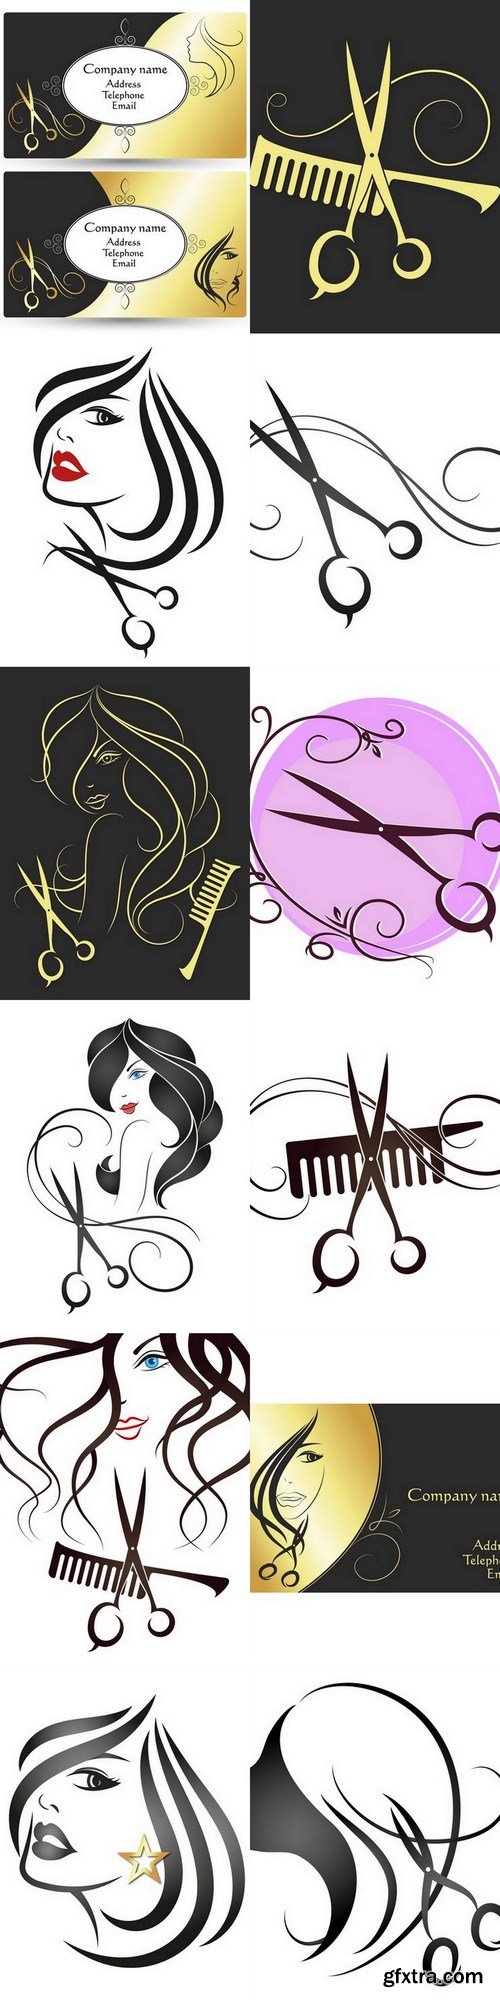 Hairdressers - 12 EPS Vector Stock